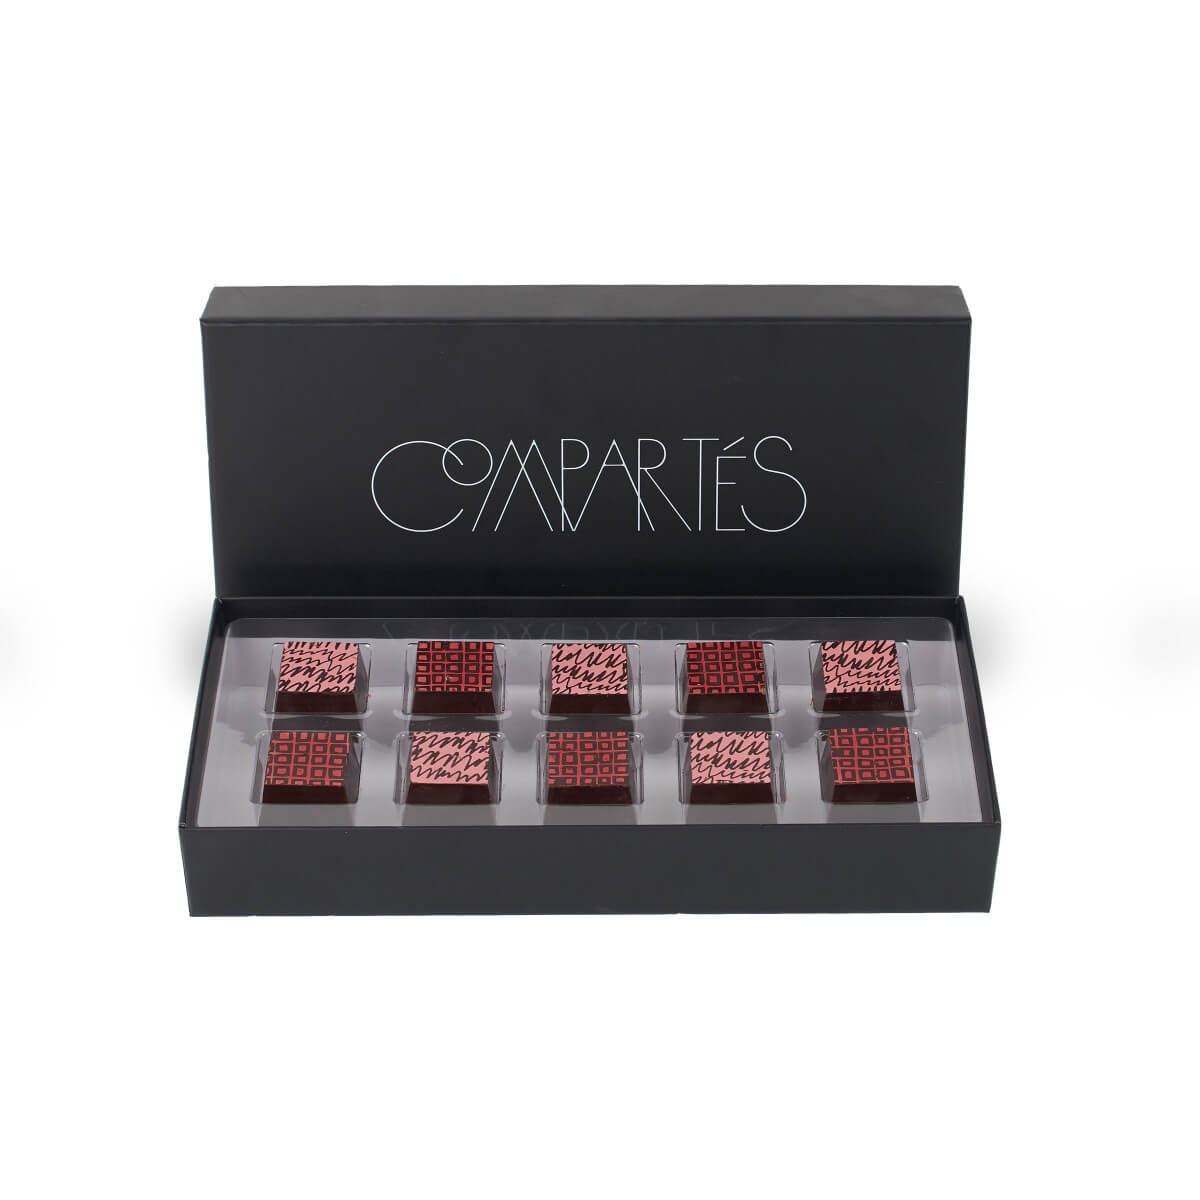 chocolates used in gift box experience